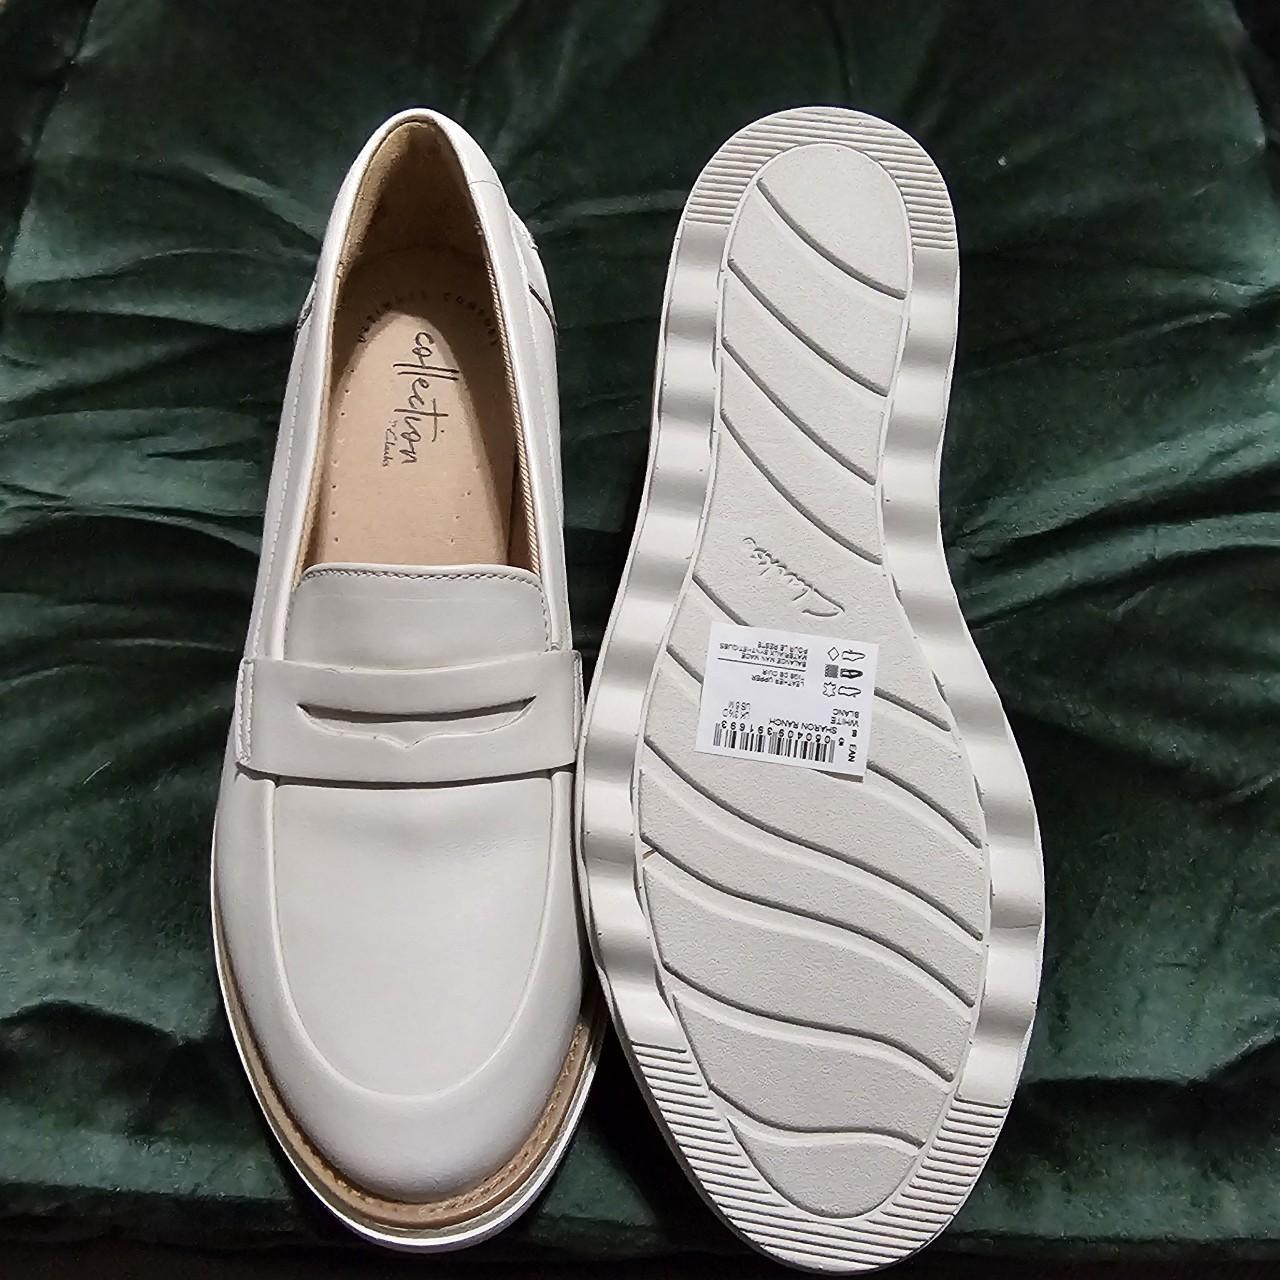 Clarks Women's White Loafers (2)